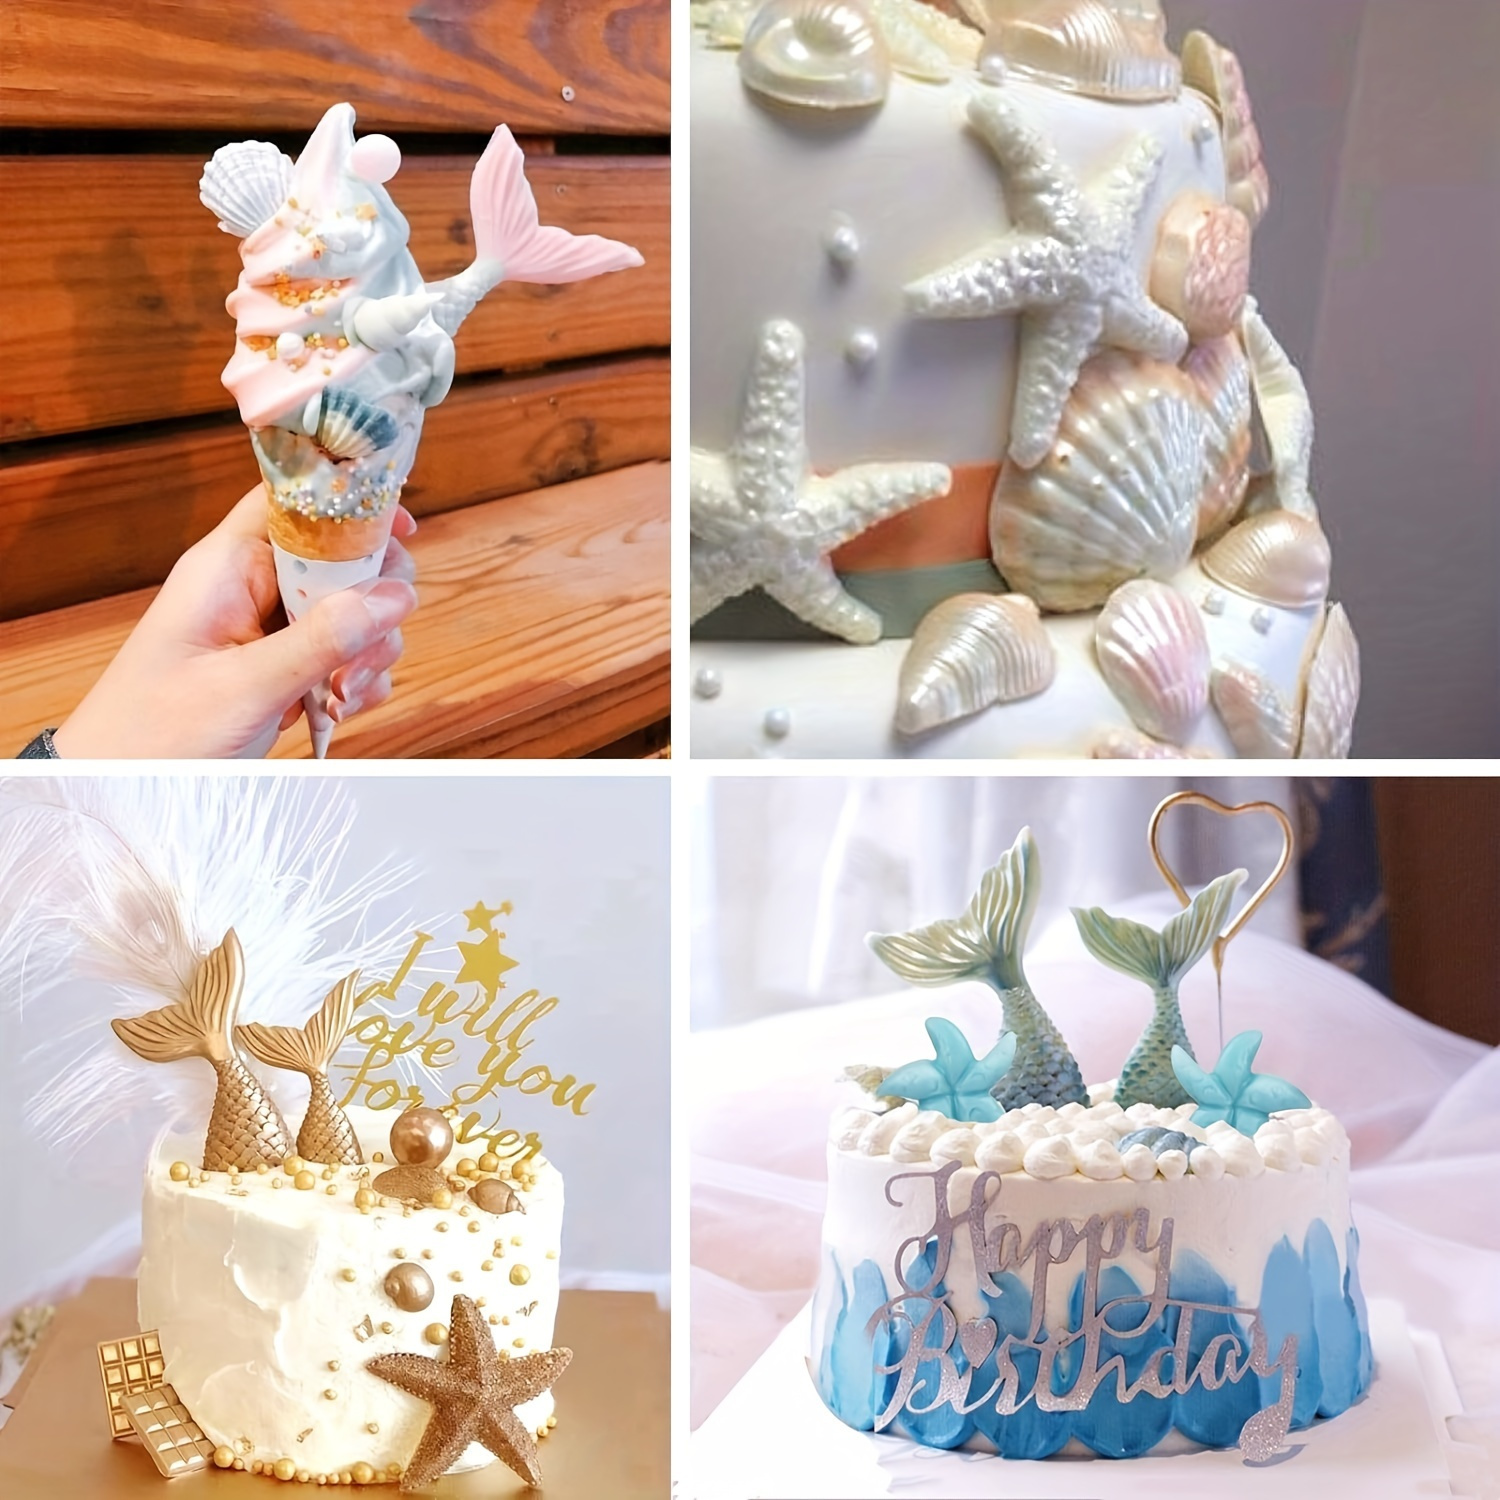 

8pcs, Mermaid Theme Cake Molds, Mermaid Shell Seaweed Coral Silicone Molds, Cupcake Topper Molds, For Candy, Chocolate, Fondant, Polymer Clay Crafting, Cake Decoration